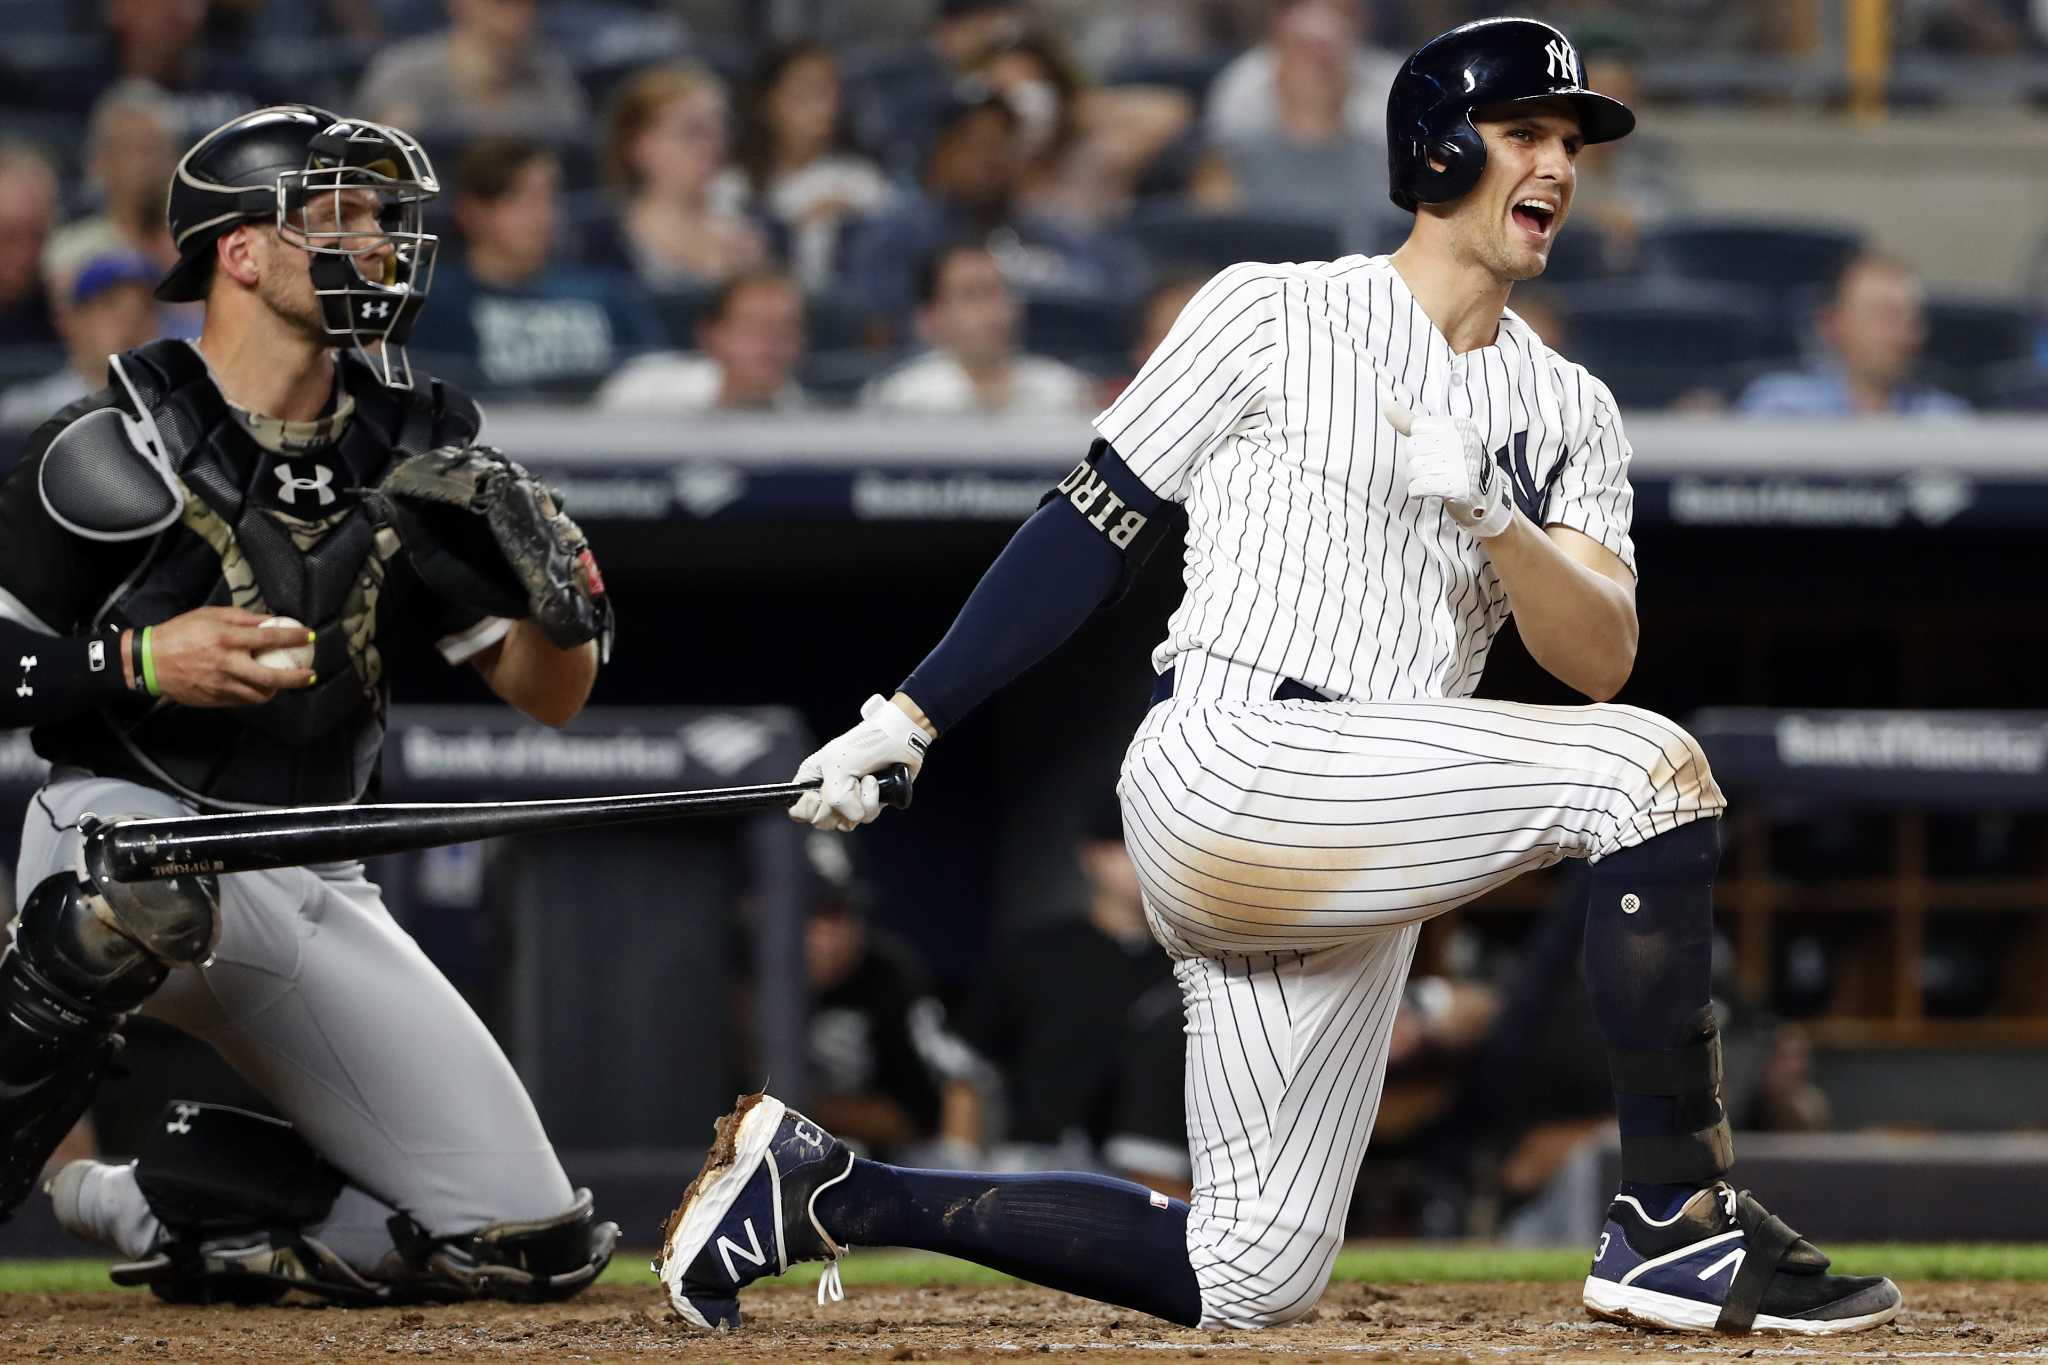 Why Greg Bird Rejoined The Yankees After Blue Jays Spring Training